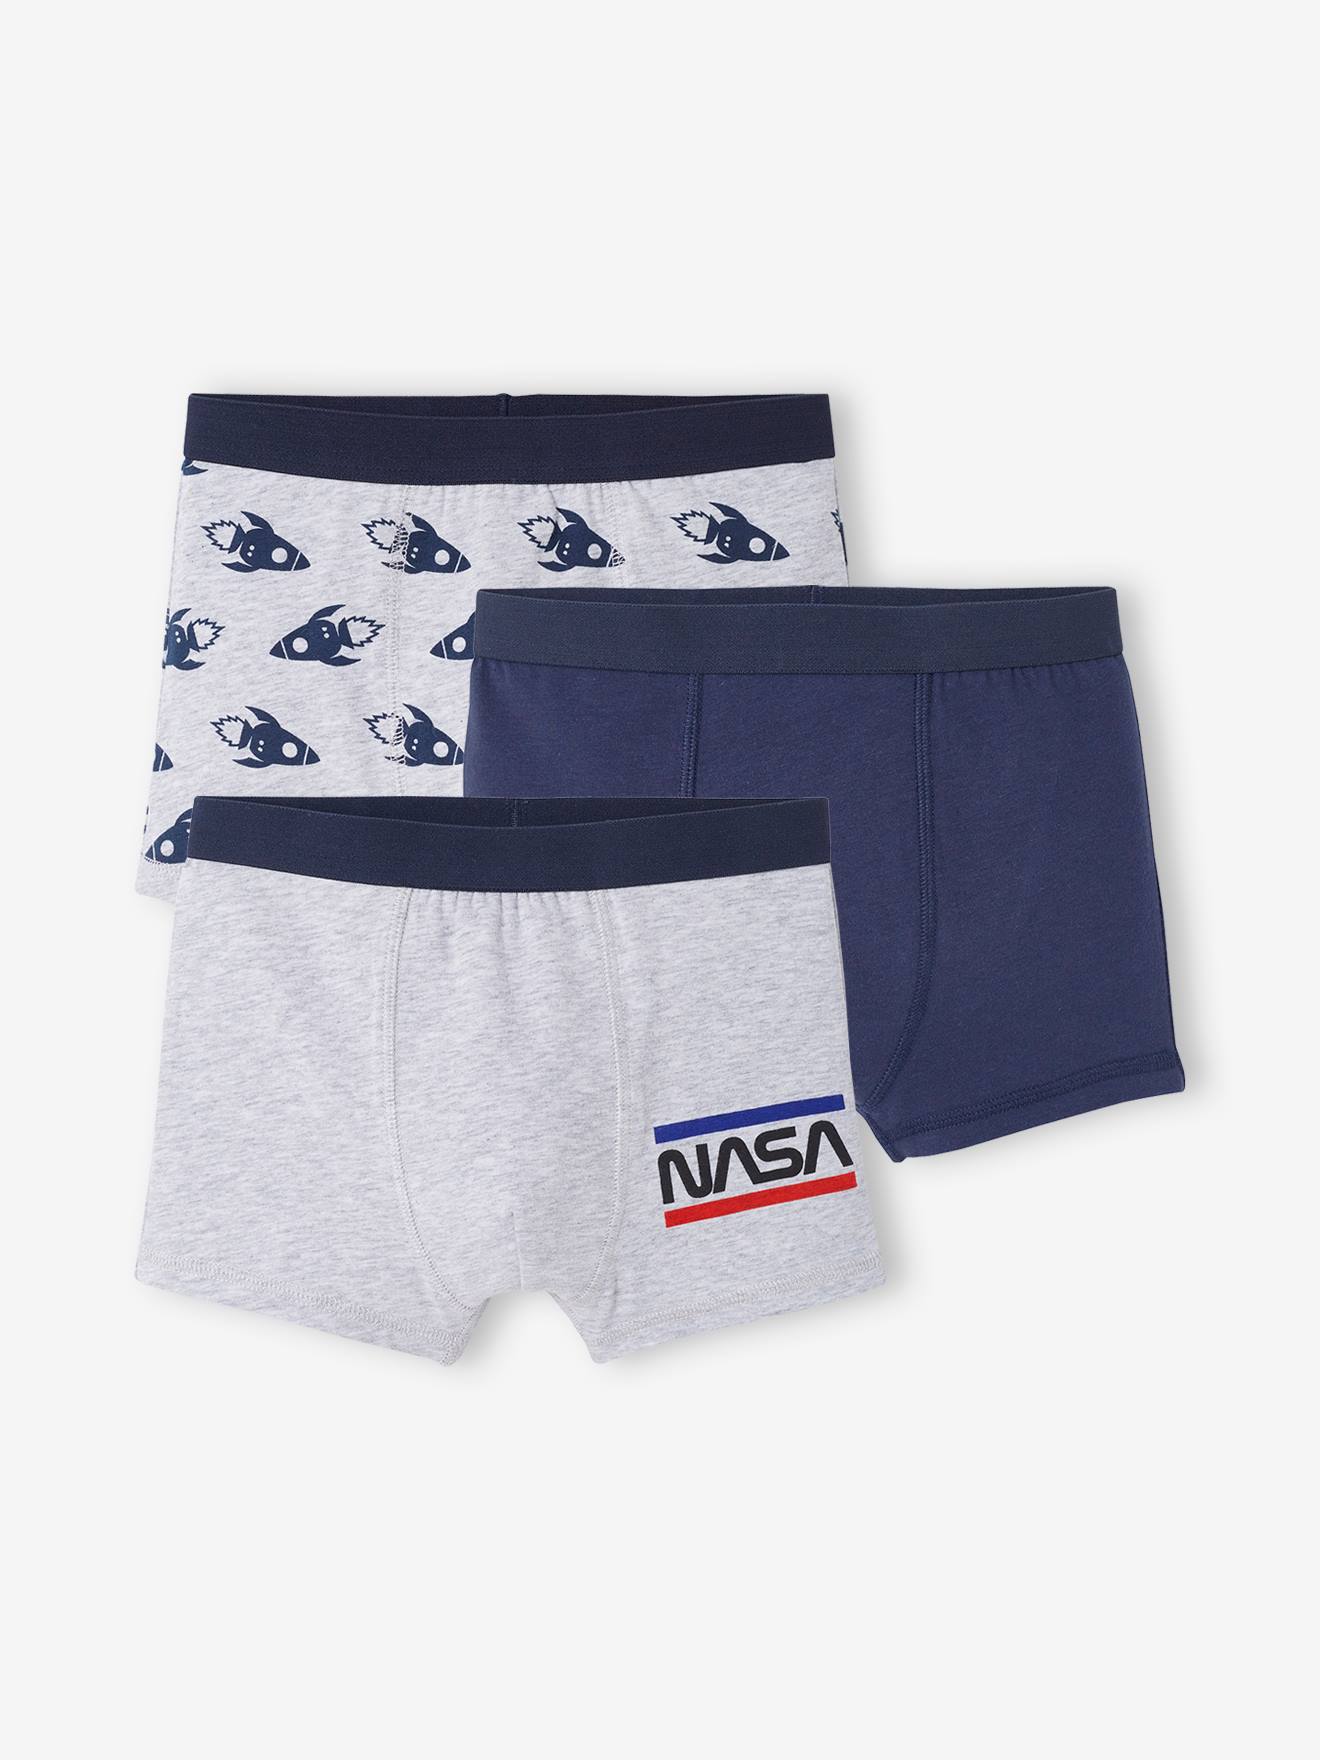 Pack of 3 NASA(r) Boxer Shorts blue dark solid with design